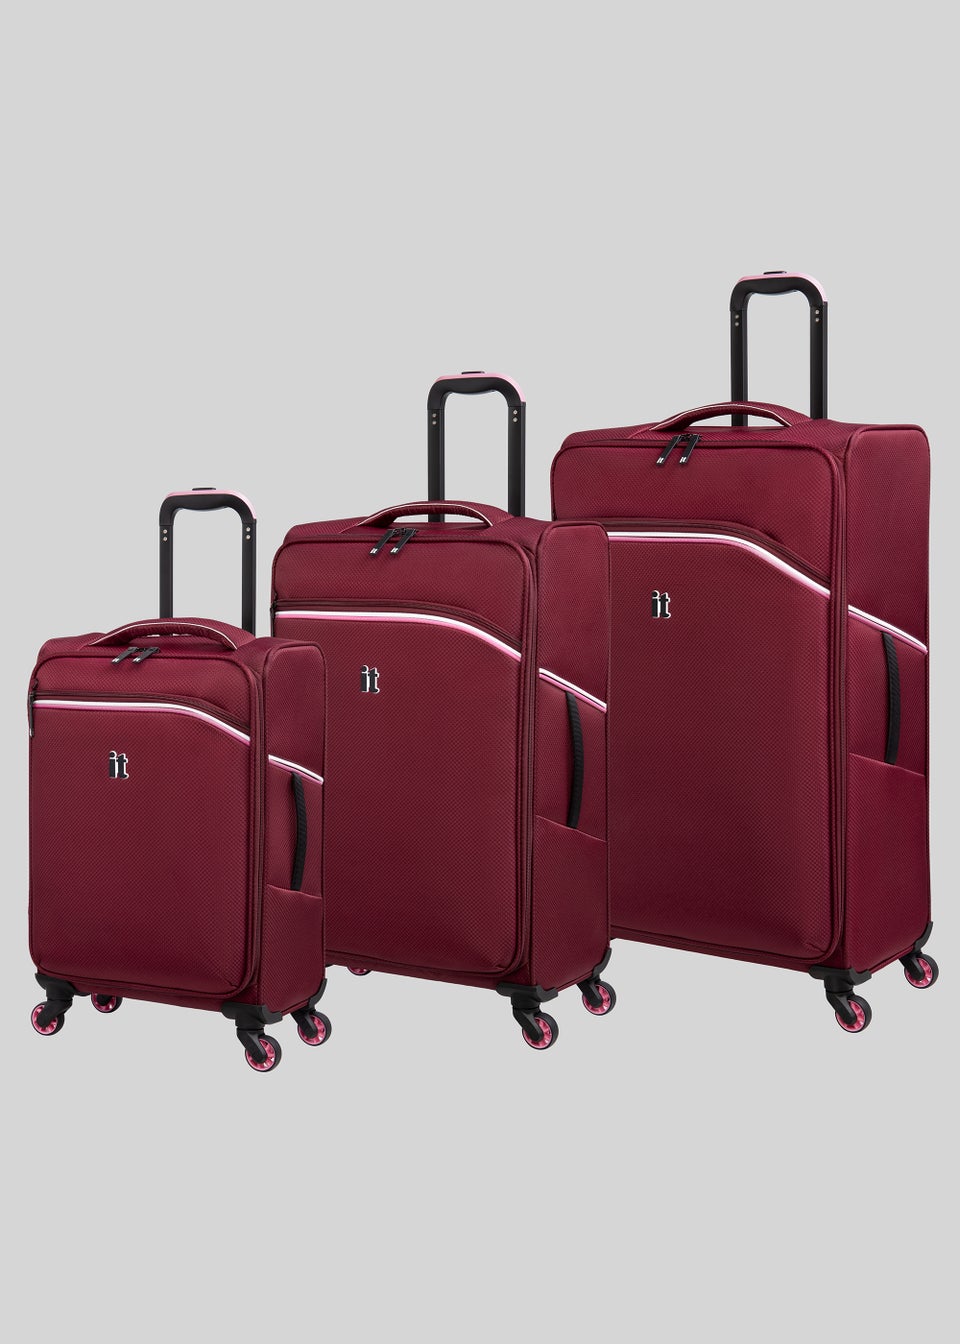 IT Luggage Soft Red Suitcase